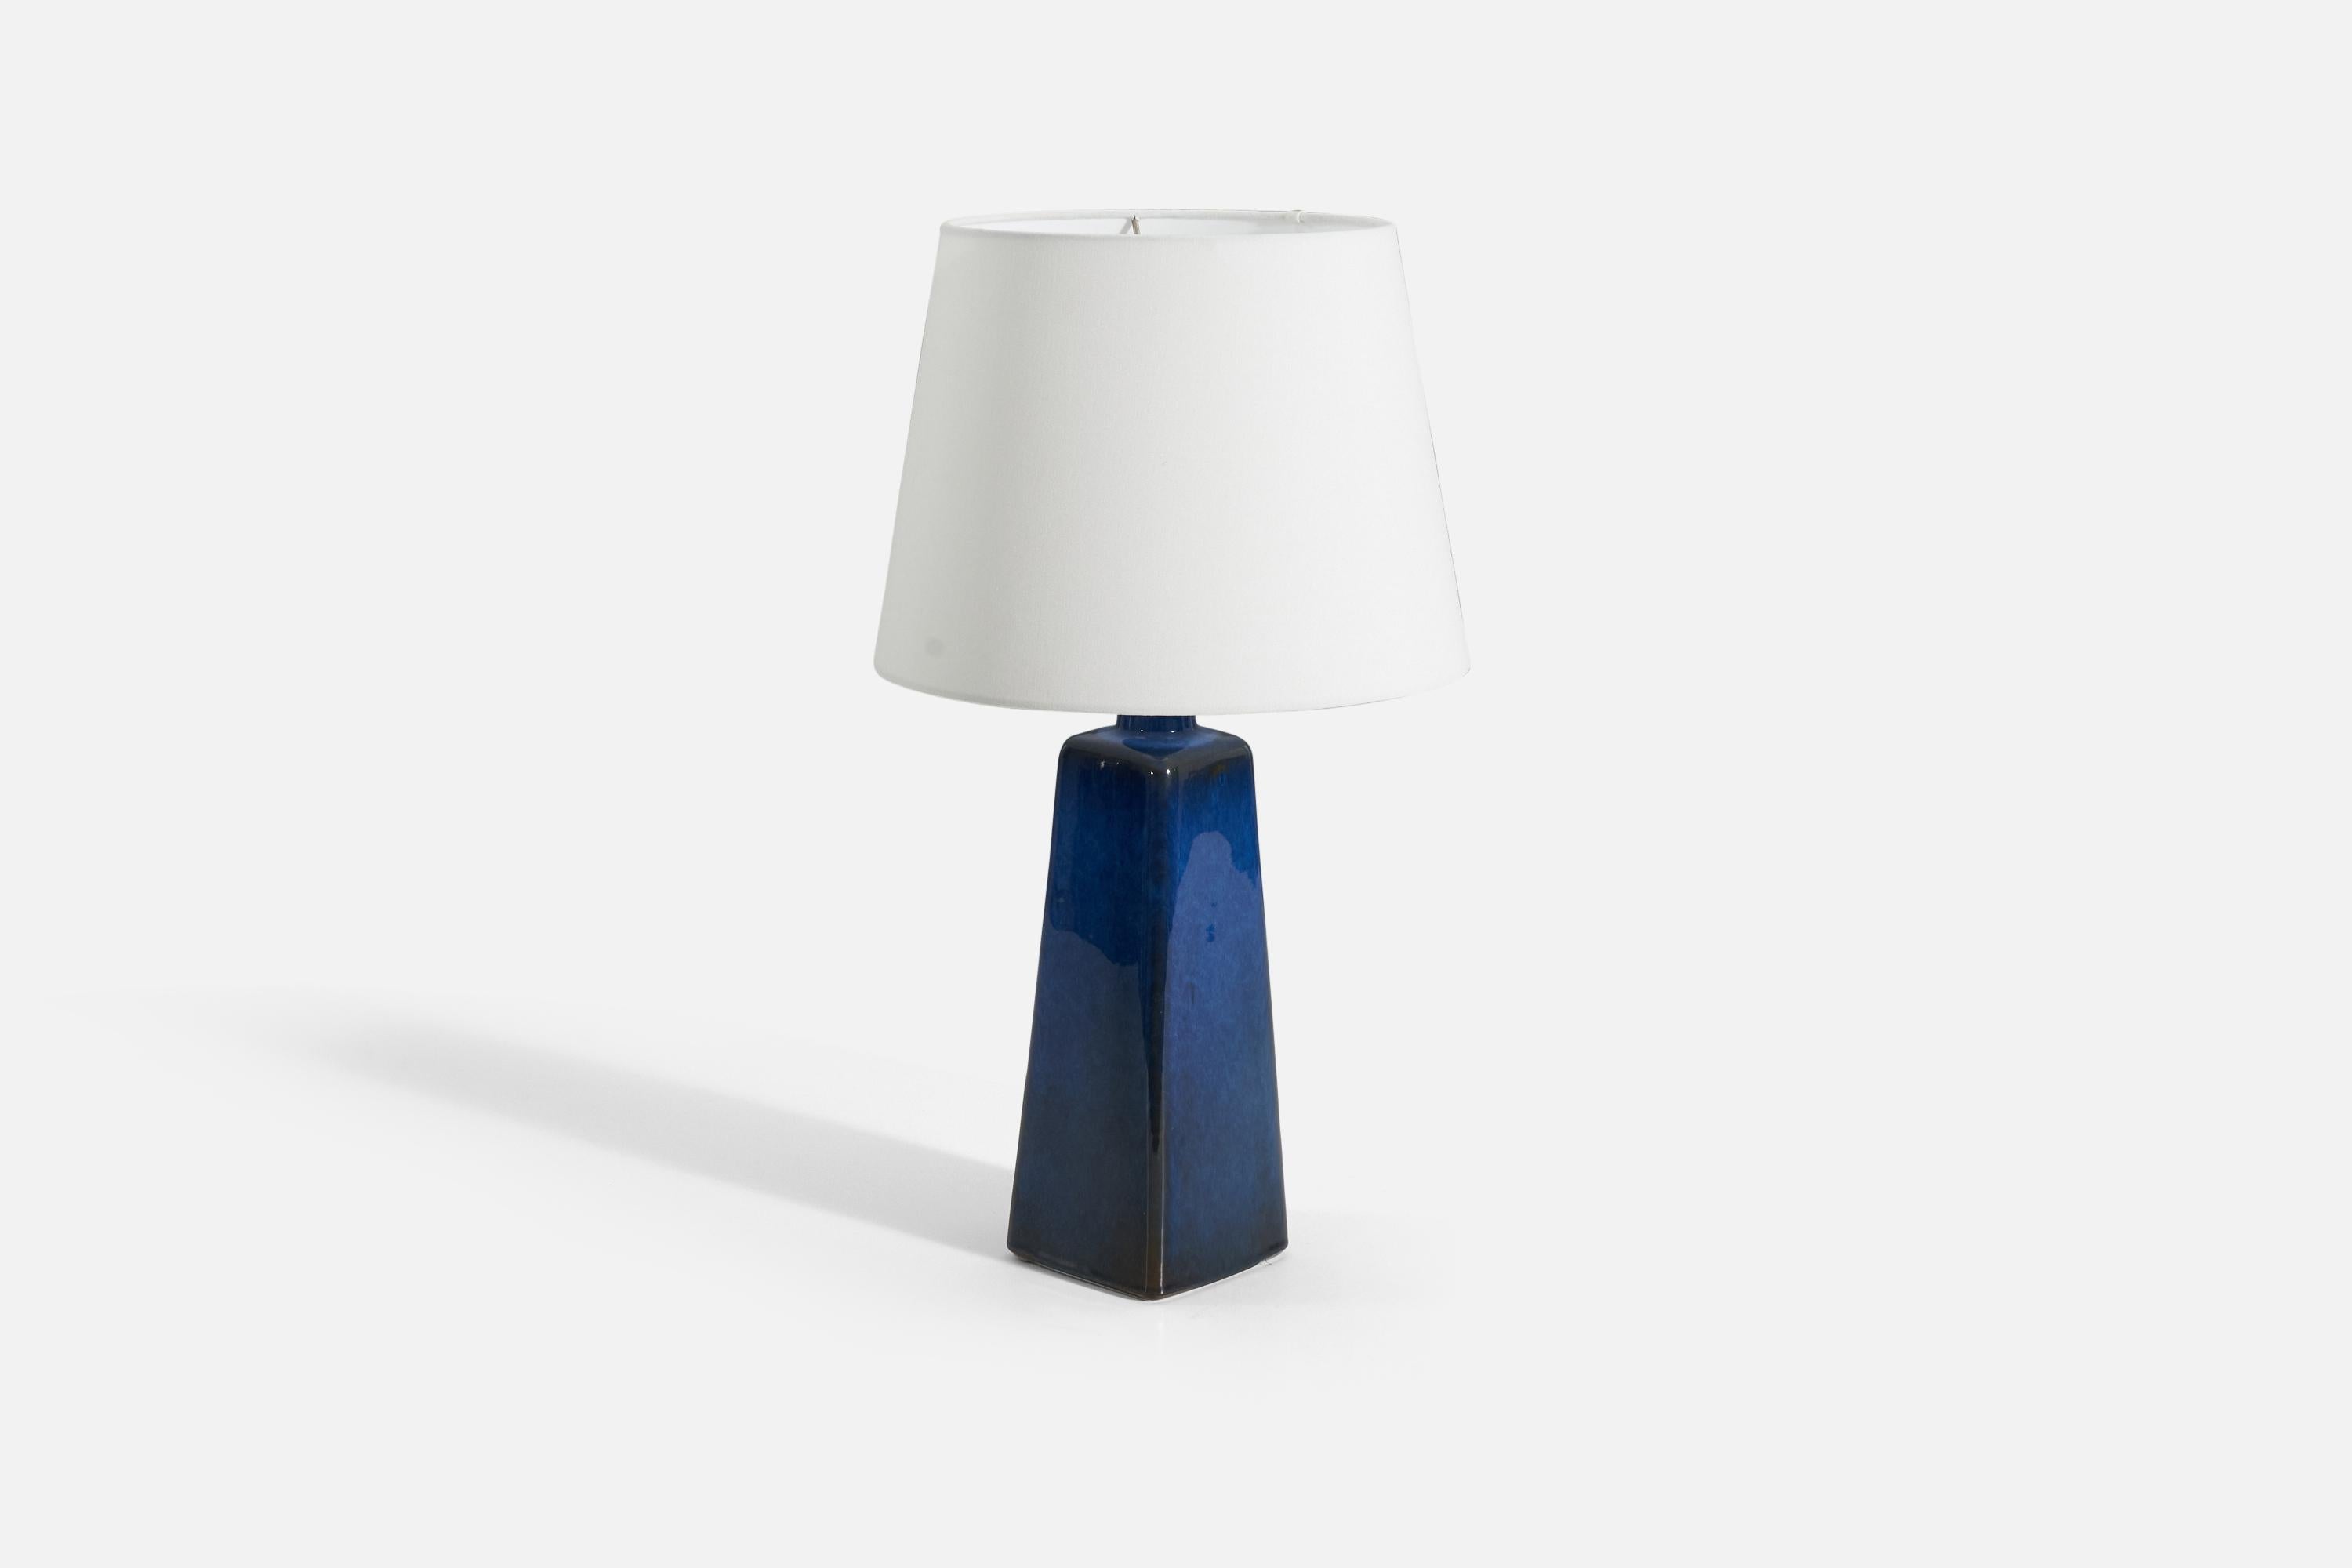  Sven Jonson, Table Lamp, Blue-Glazed Stoneware, Gustavsberg, Sweden, 1950s In Good Condition For Sale In High Point, NC